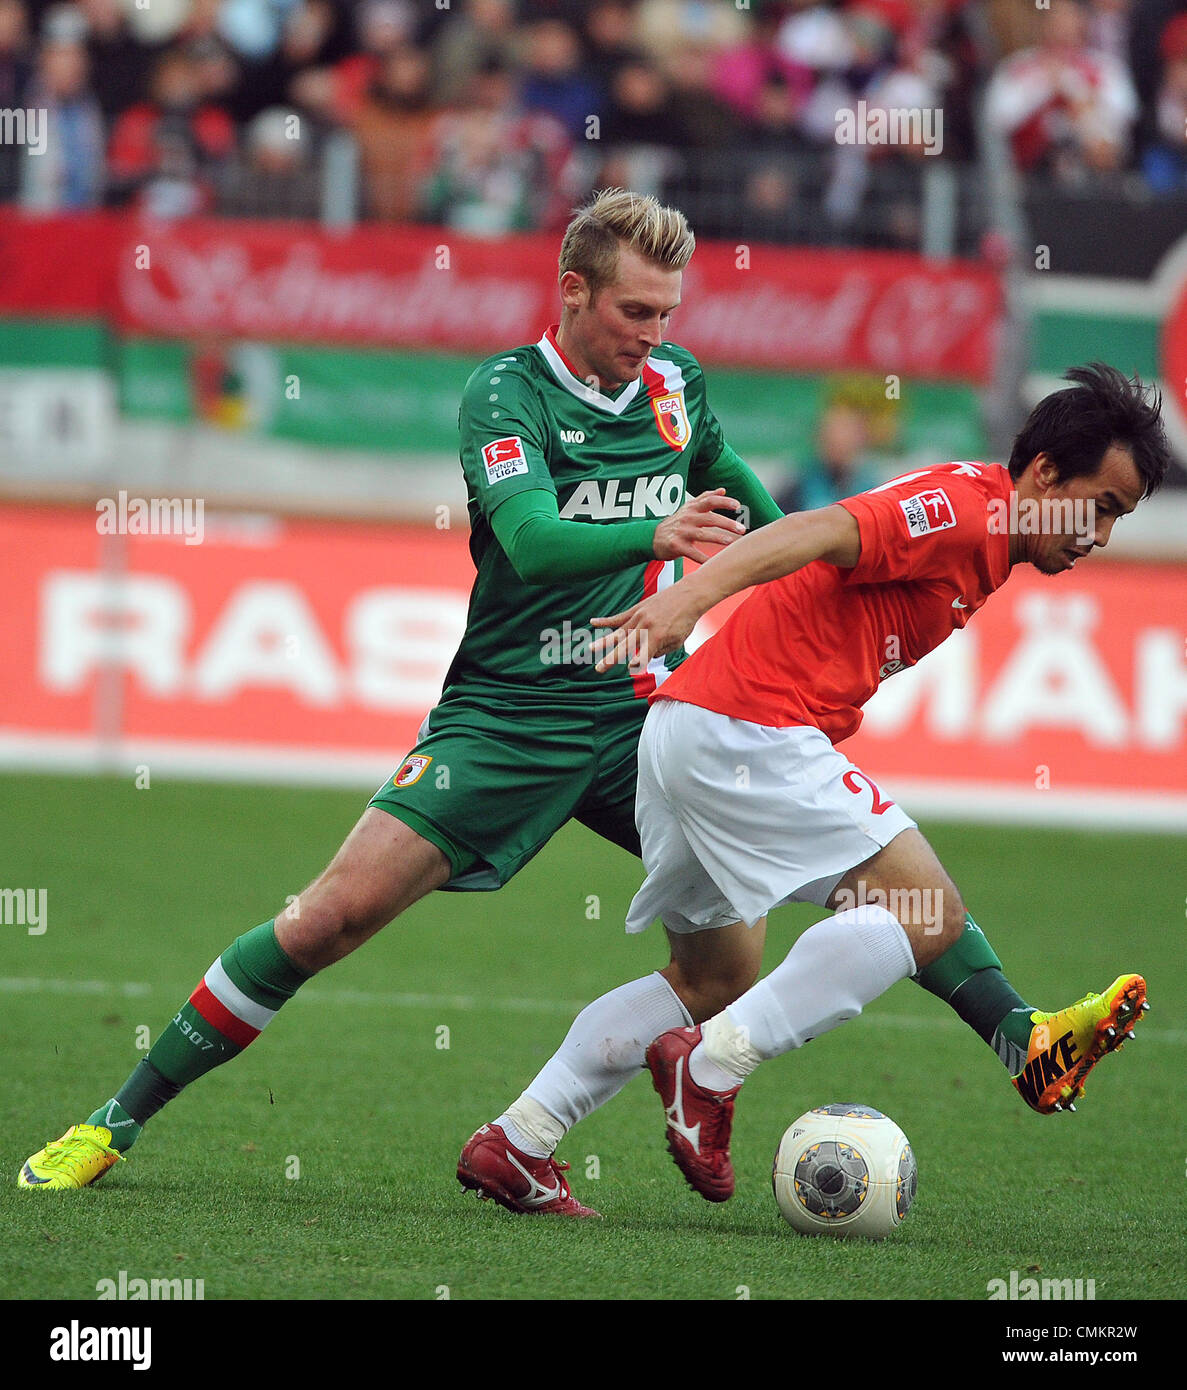 Augsburg, Germany. 03rd Nov, 2013. Augsburg's Jan-Ingwer Callsen-Bracker (L) vies for the ball with Mainz's Park Joo-Ho during the German Bundesliga match between FC Augsburg and 1.FSV Mainz 05 at the SGL-Arena in Augsburg, Germany, 03 November 2013. Photo: STEFAN PUCHNER/dpa/Alamy Live News Stock Photo